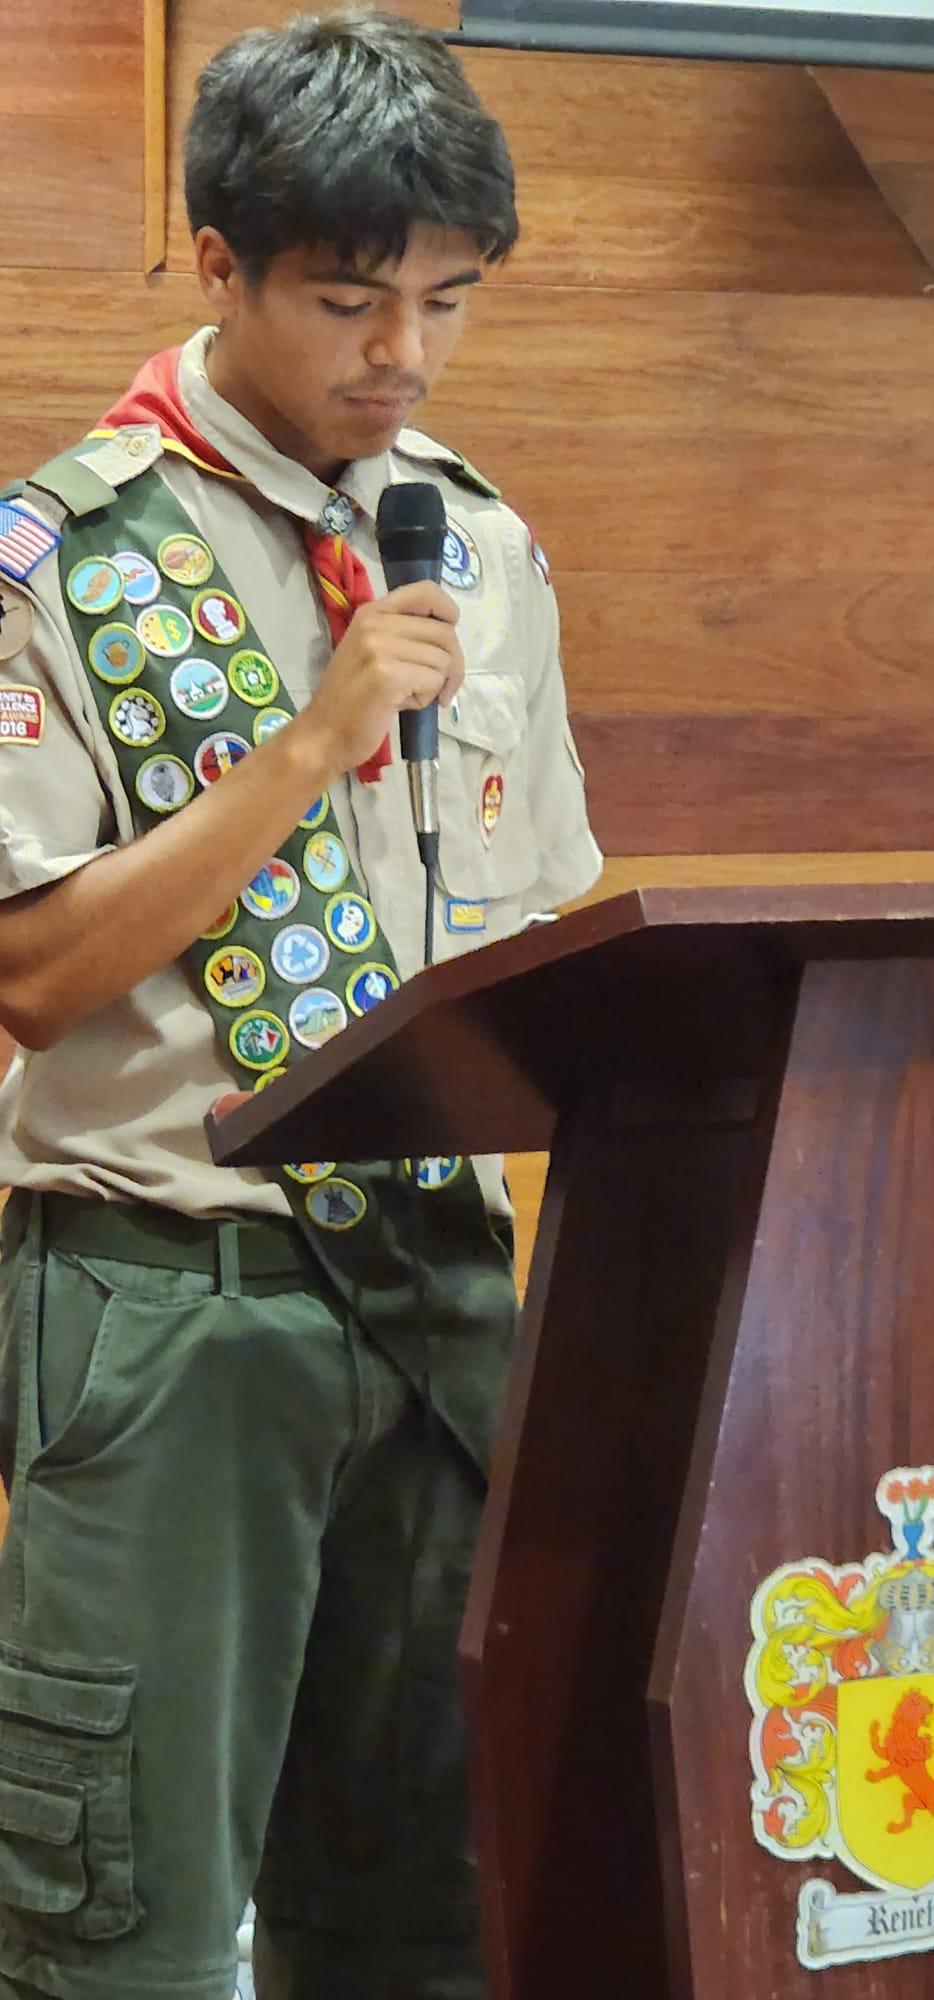 Welcome to Troop 58 - Boy Scout Troop 58 - Canyon Country, CABoy